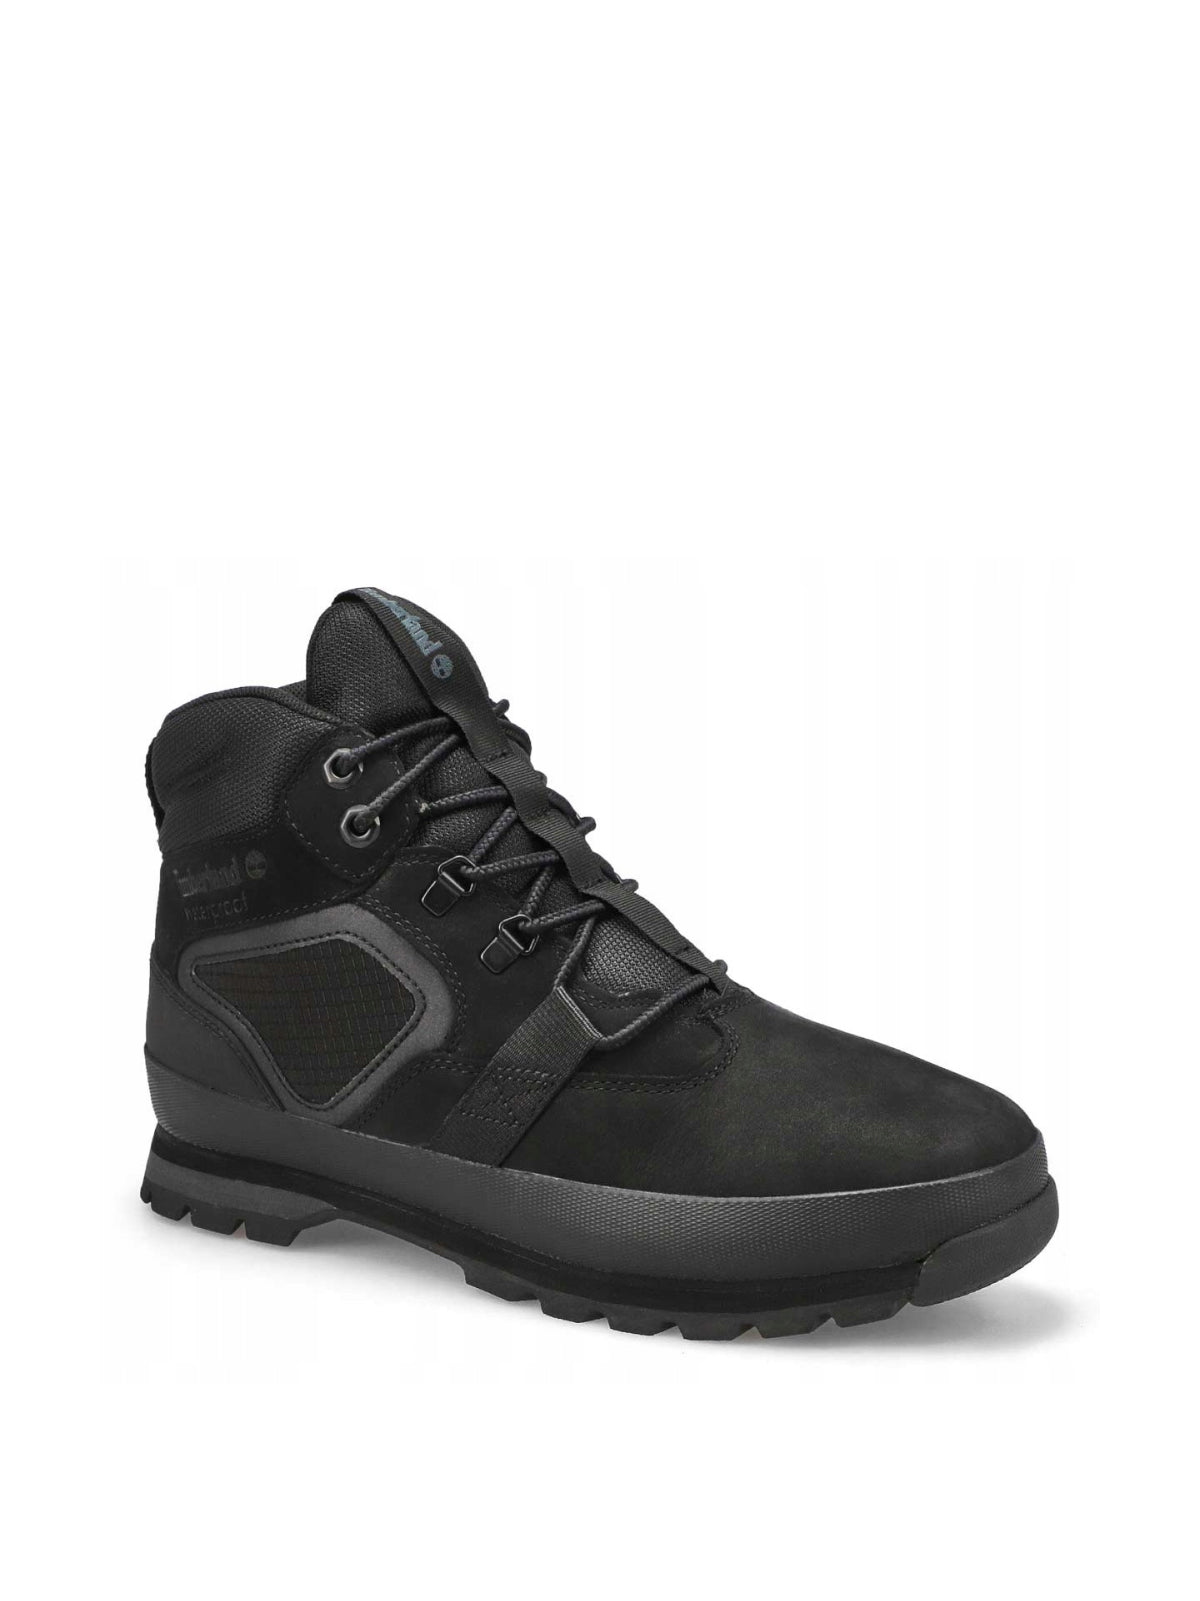 Euro Hiker Reimagined WP Boots